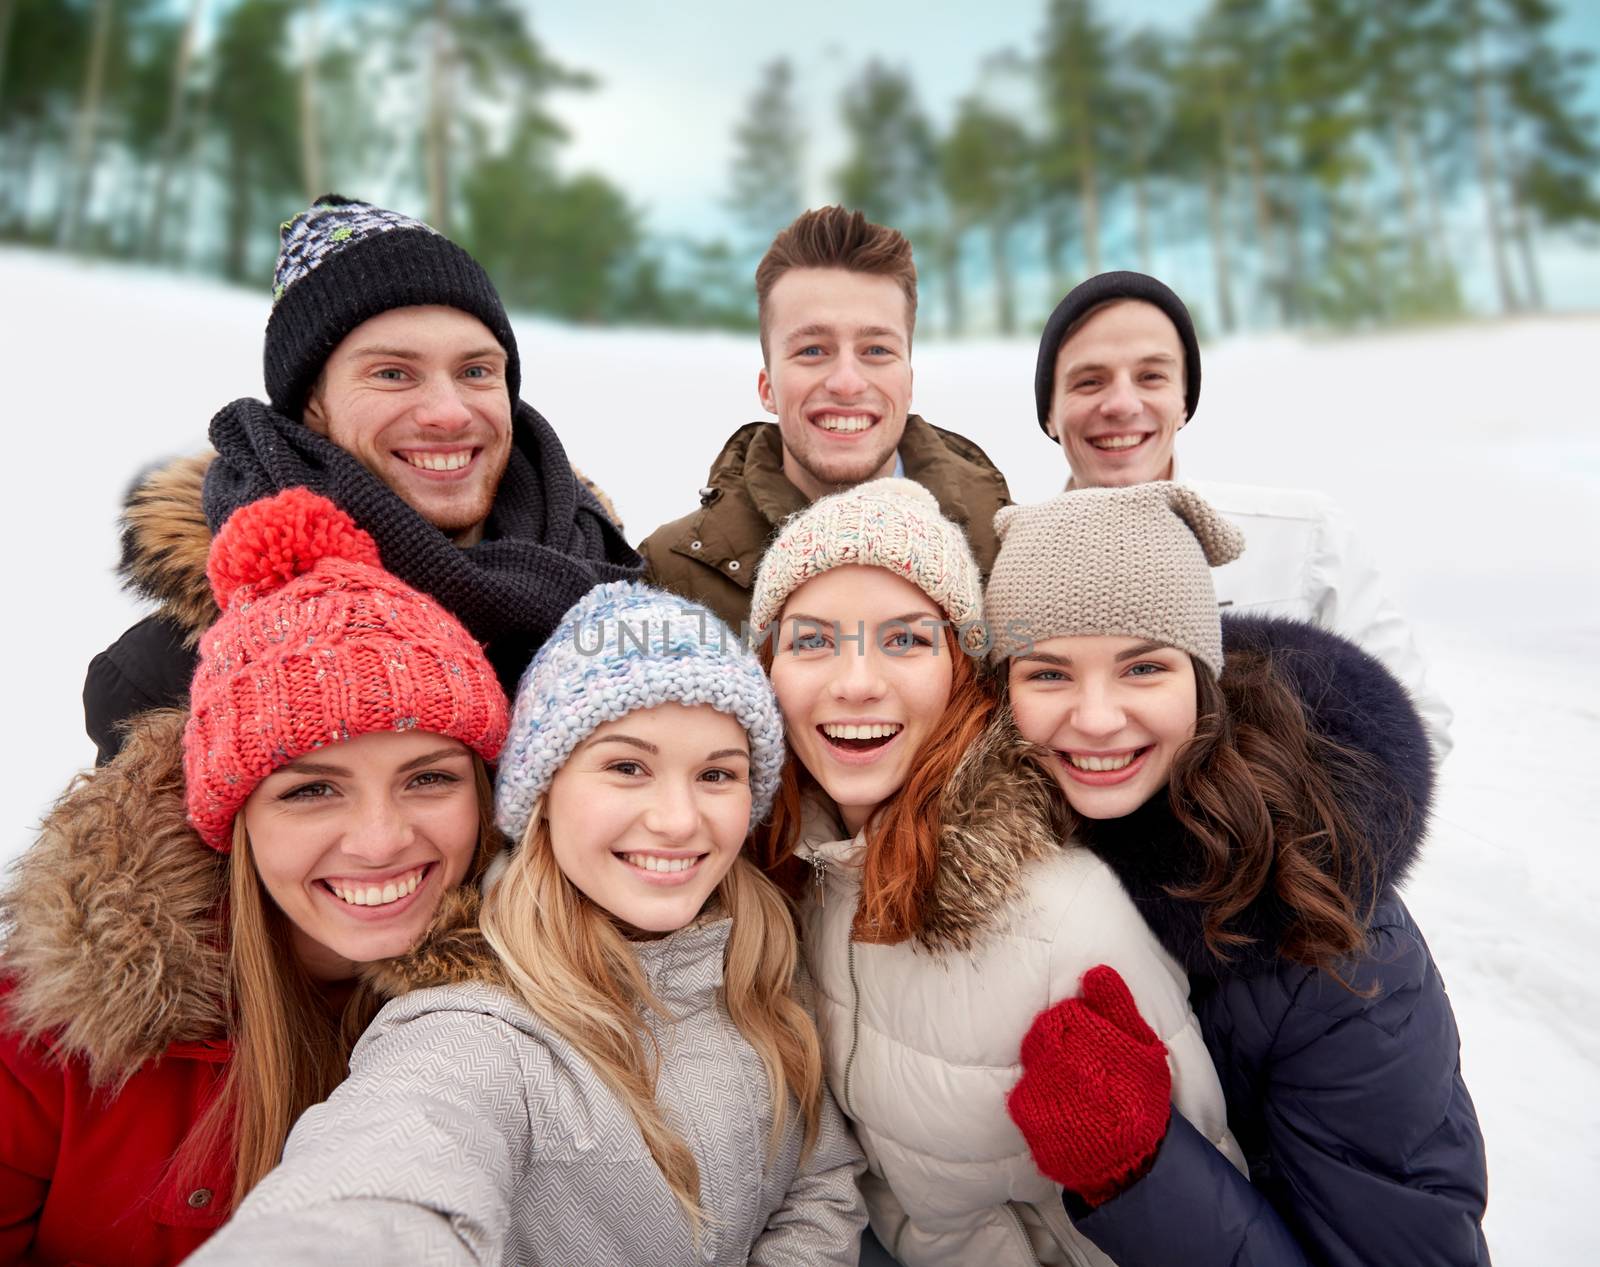 winter, technology, friendship and people concept - group of smiling men and women taking selfie outdoors